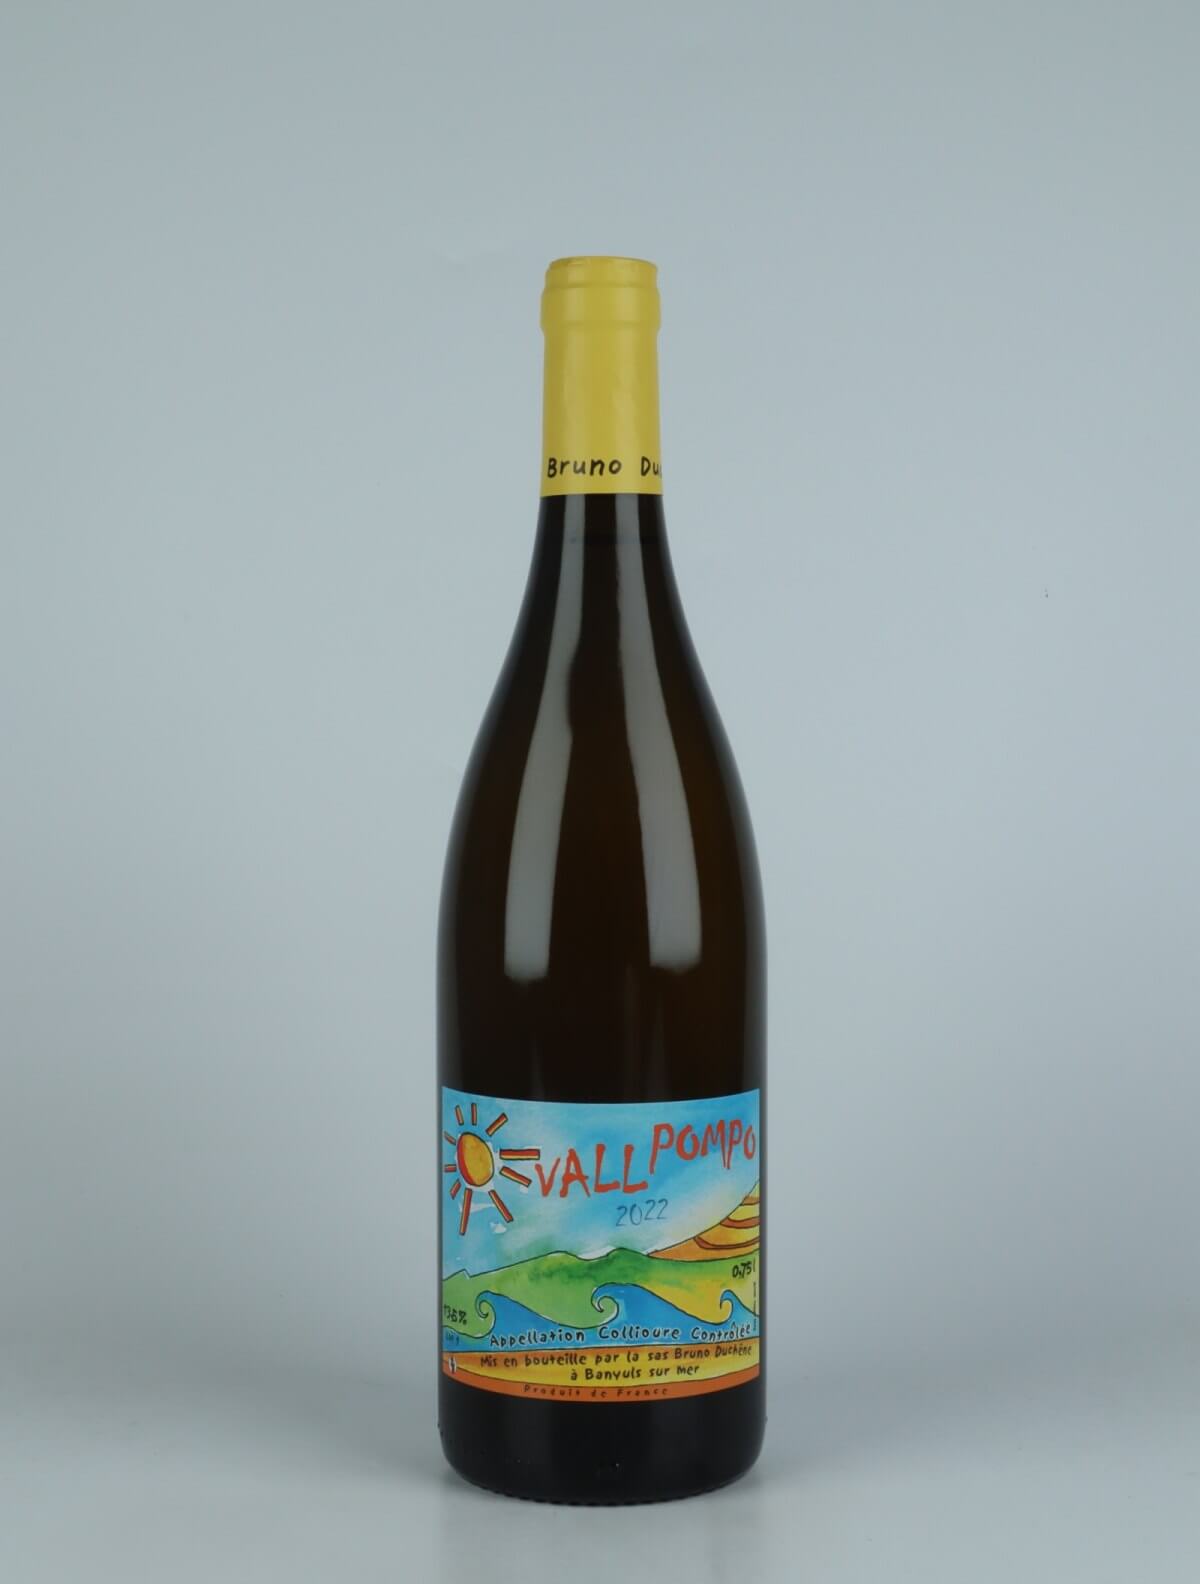 A bottle 2022 Vall Pompo White wine from Bruno Duchêne, Rousillon in France